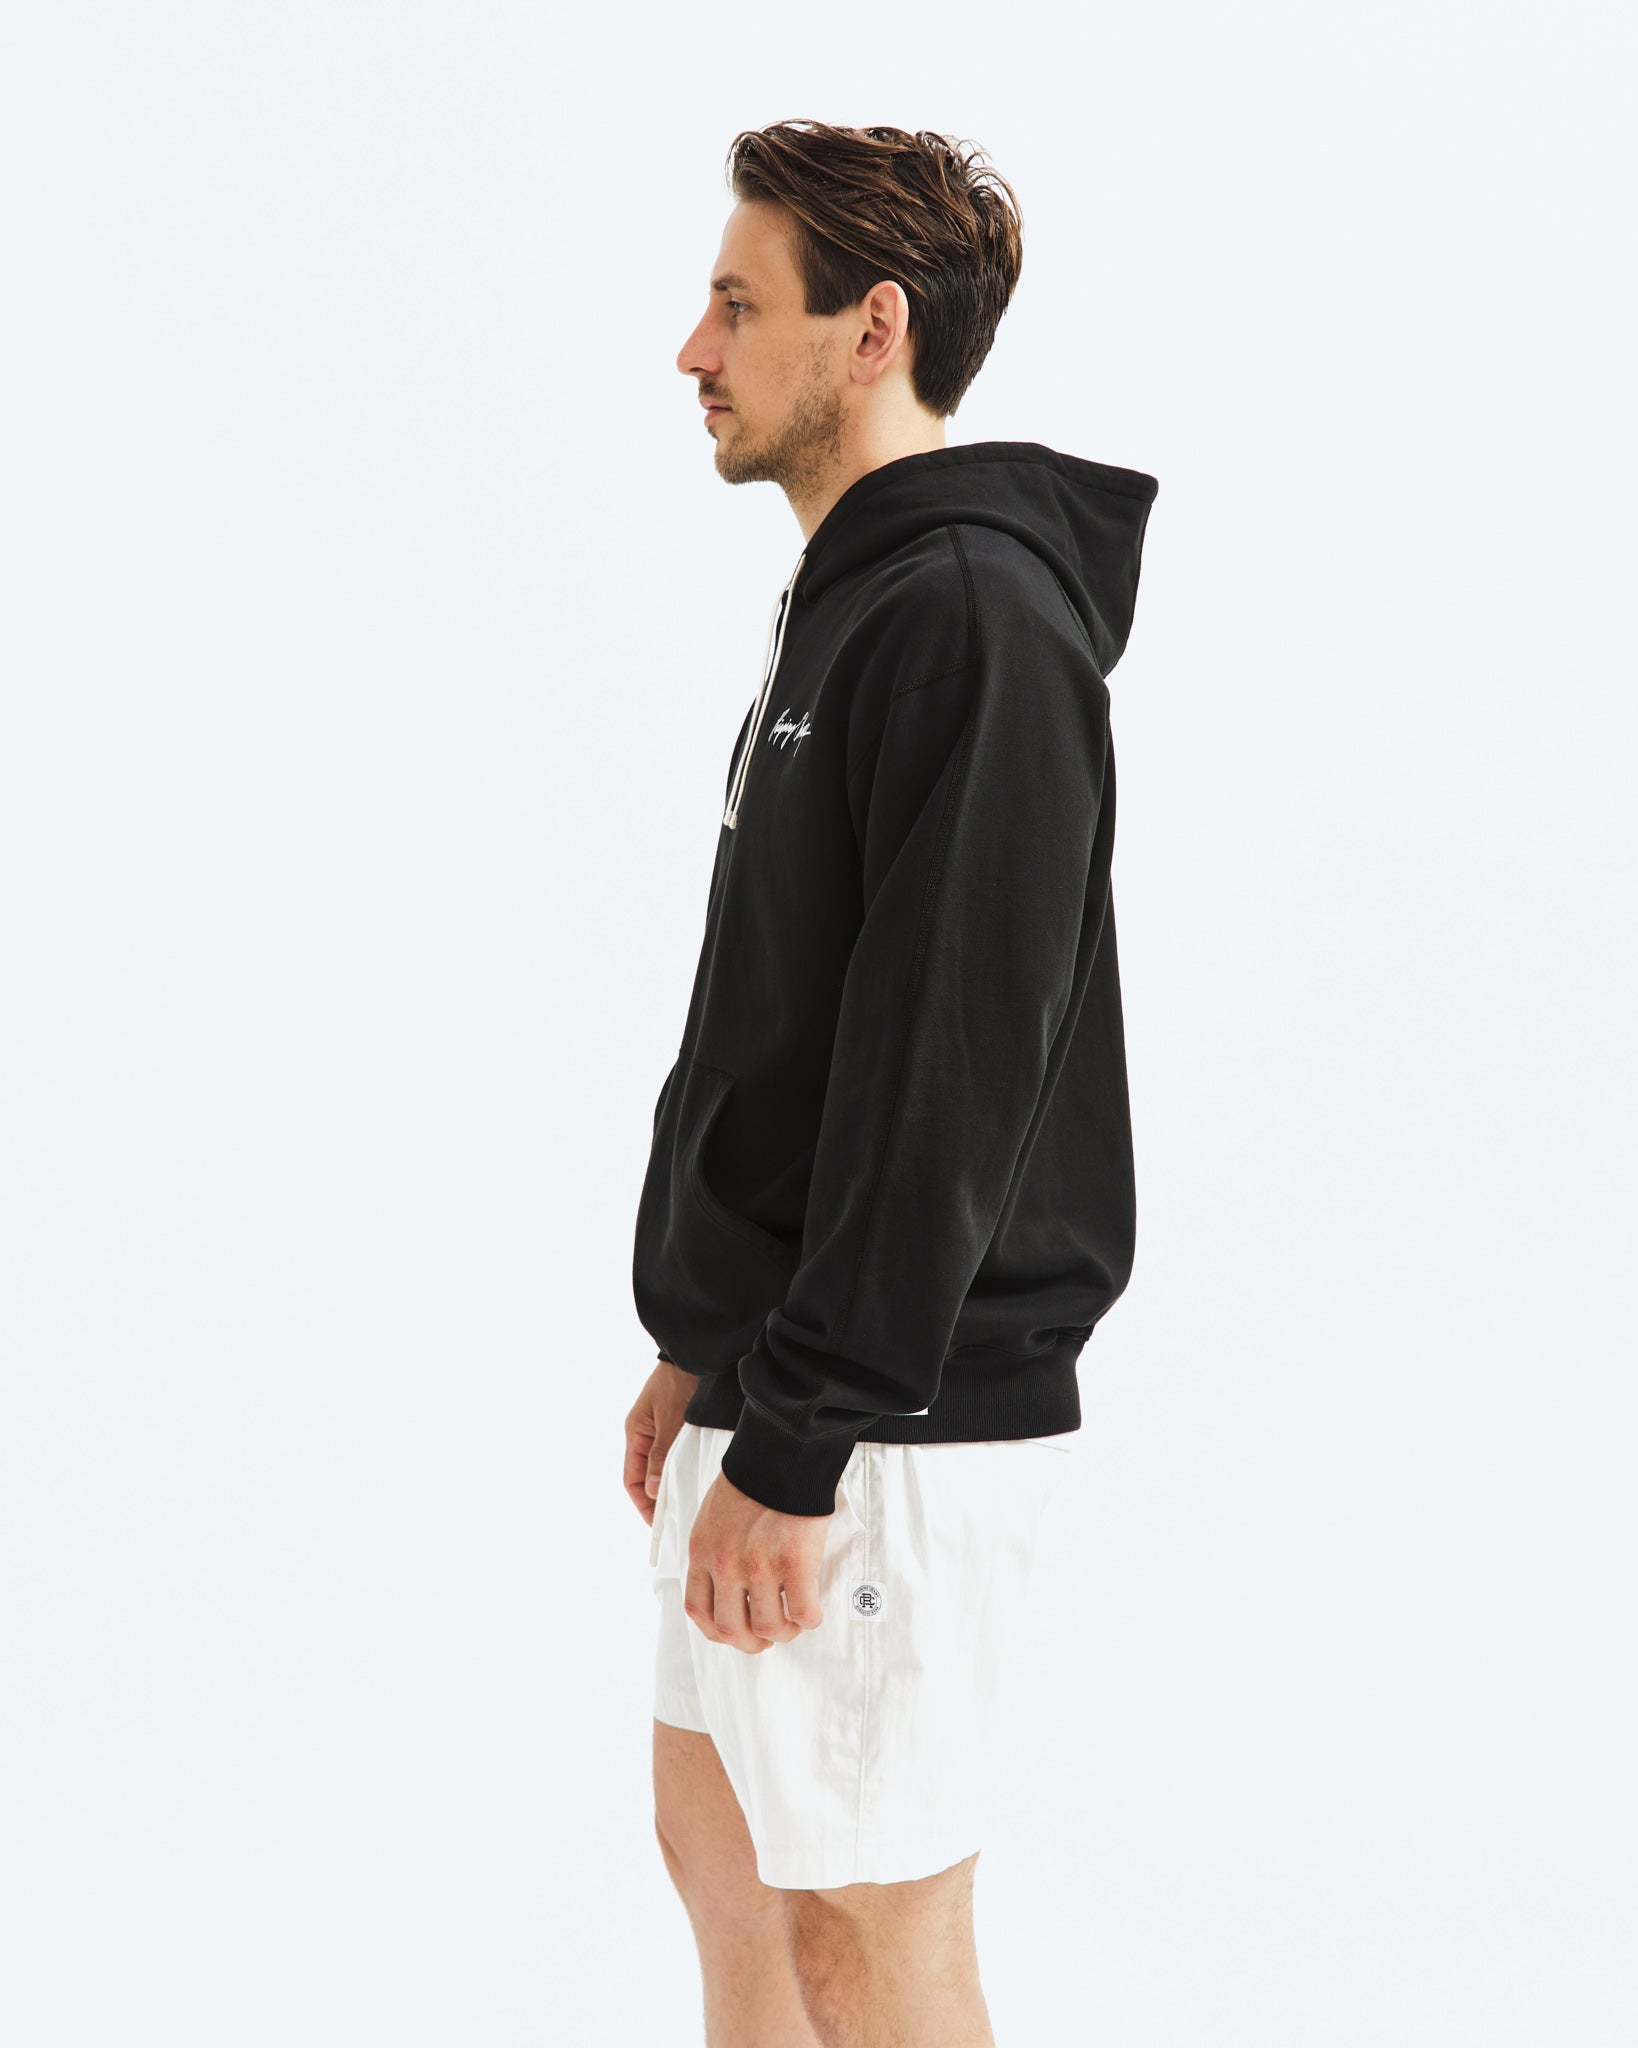 Autograph Hoodie| Reigning Champ